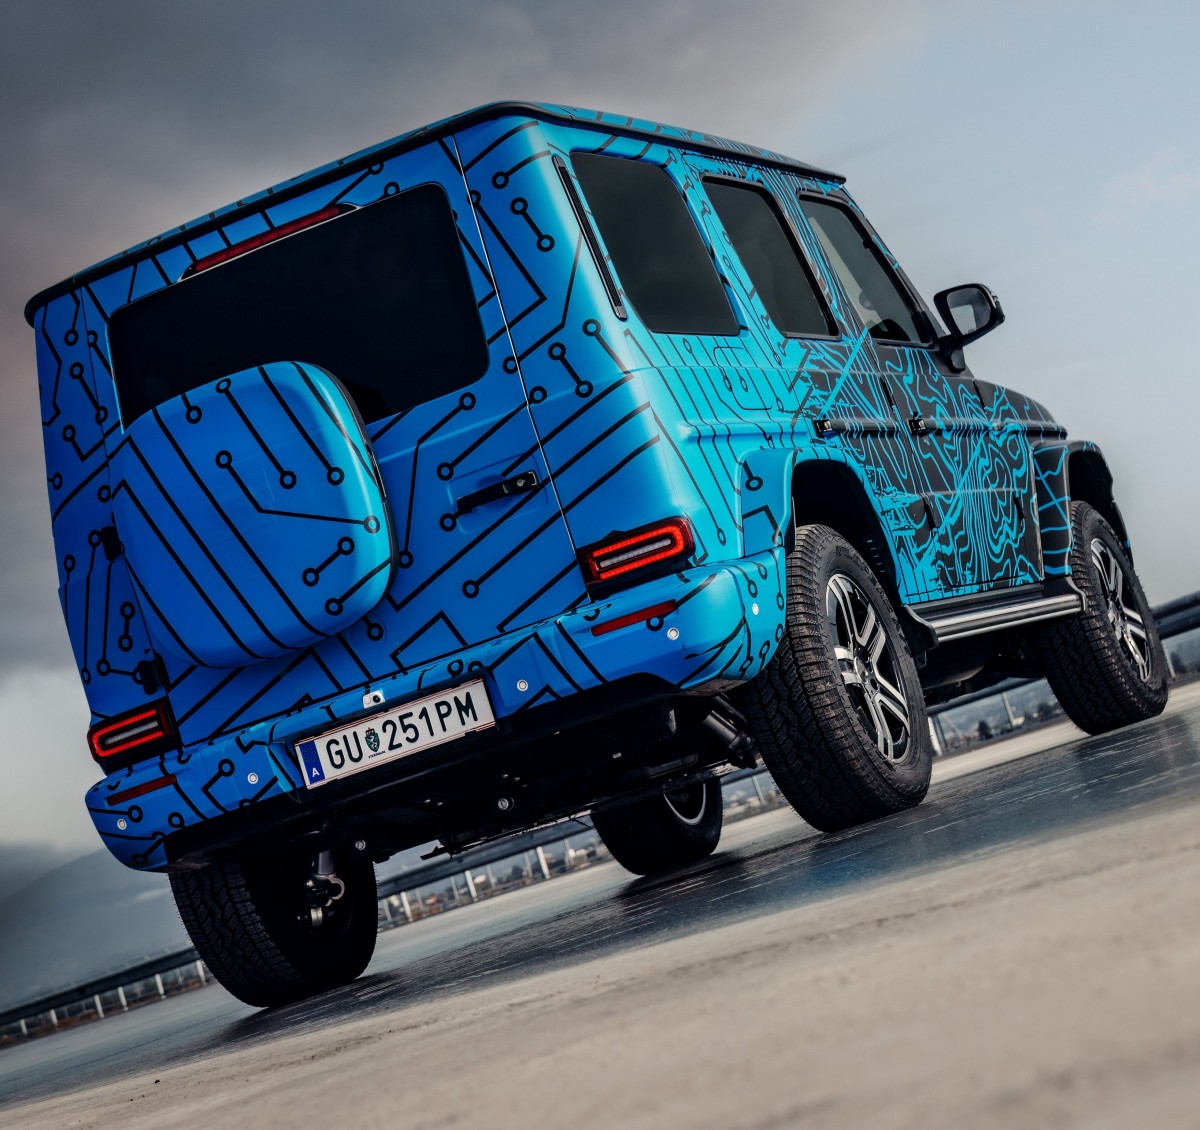 Mercedes teases the upcoming electric 2025 G-Class